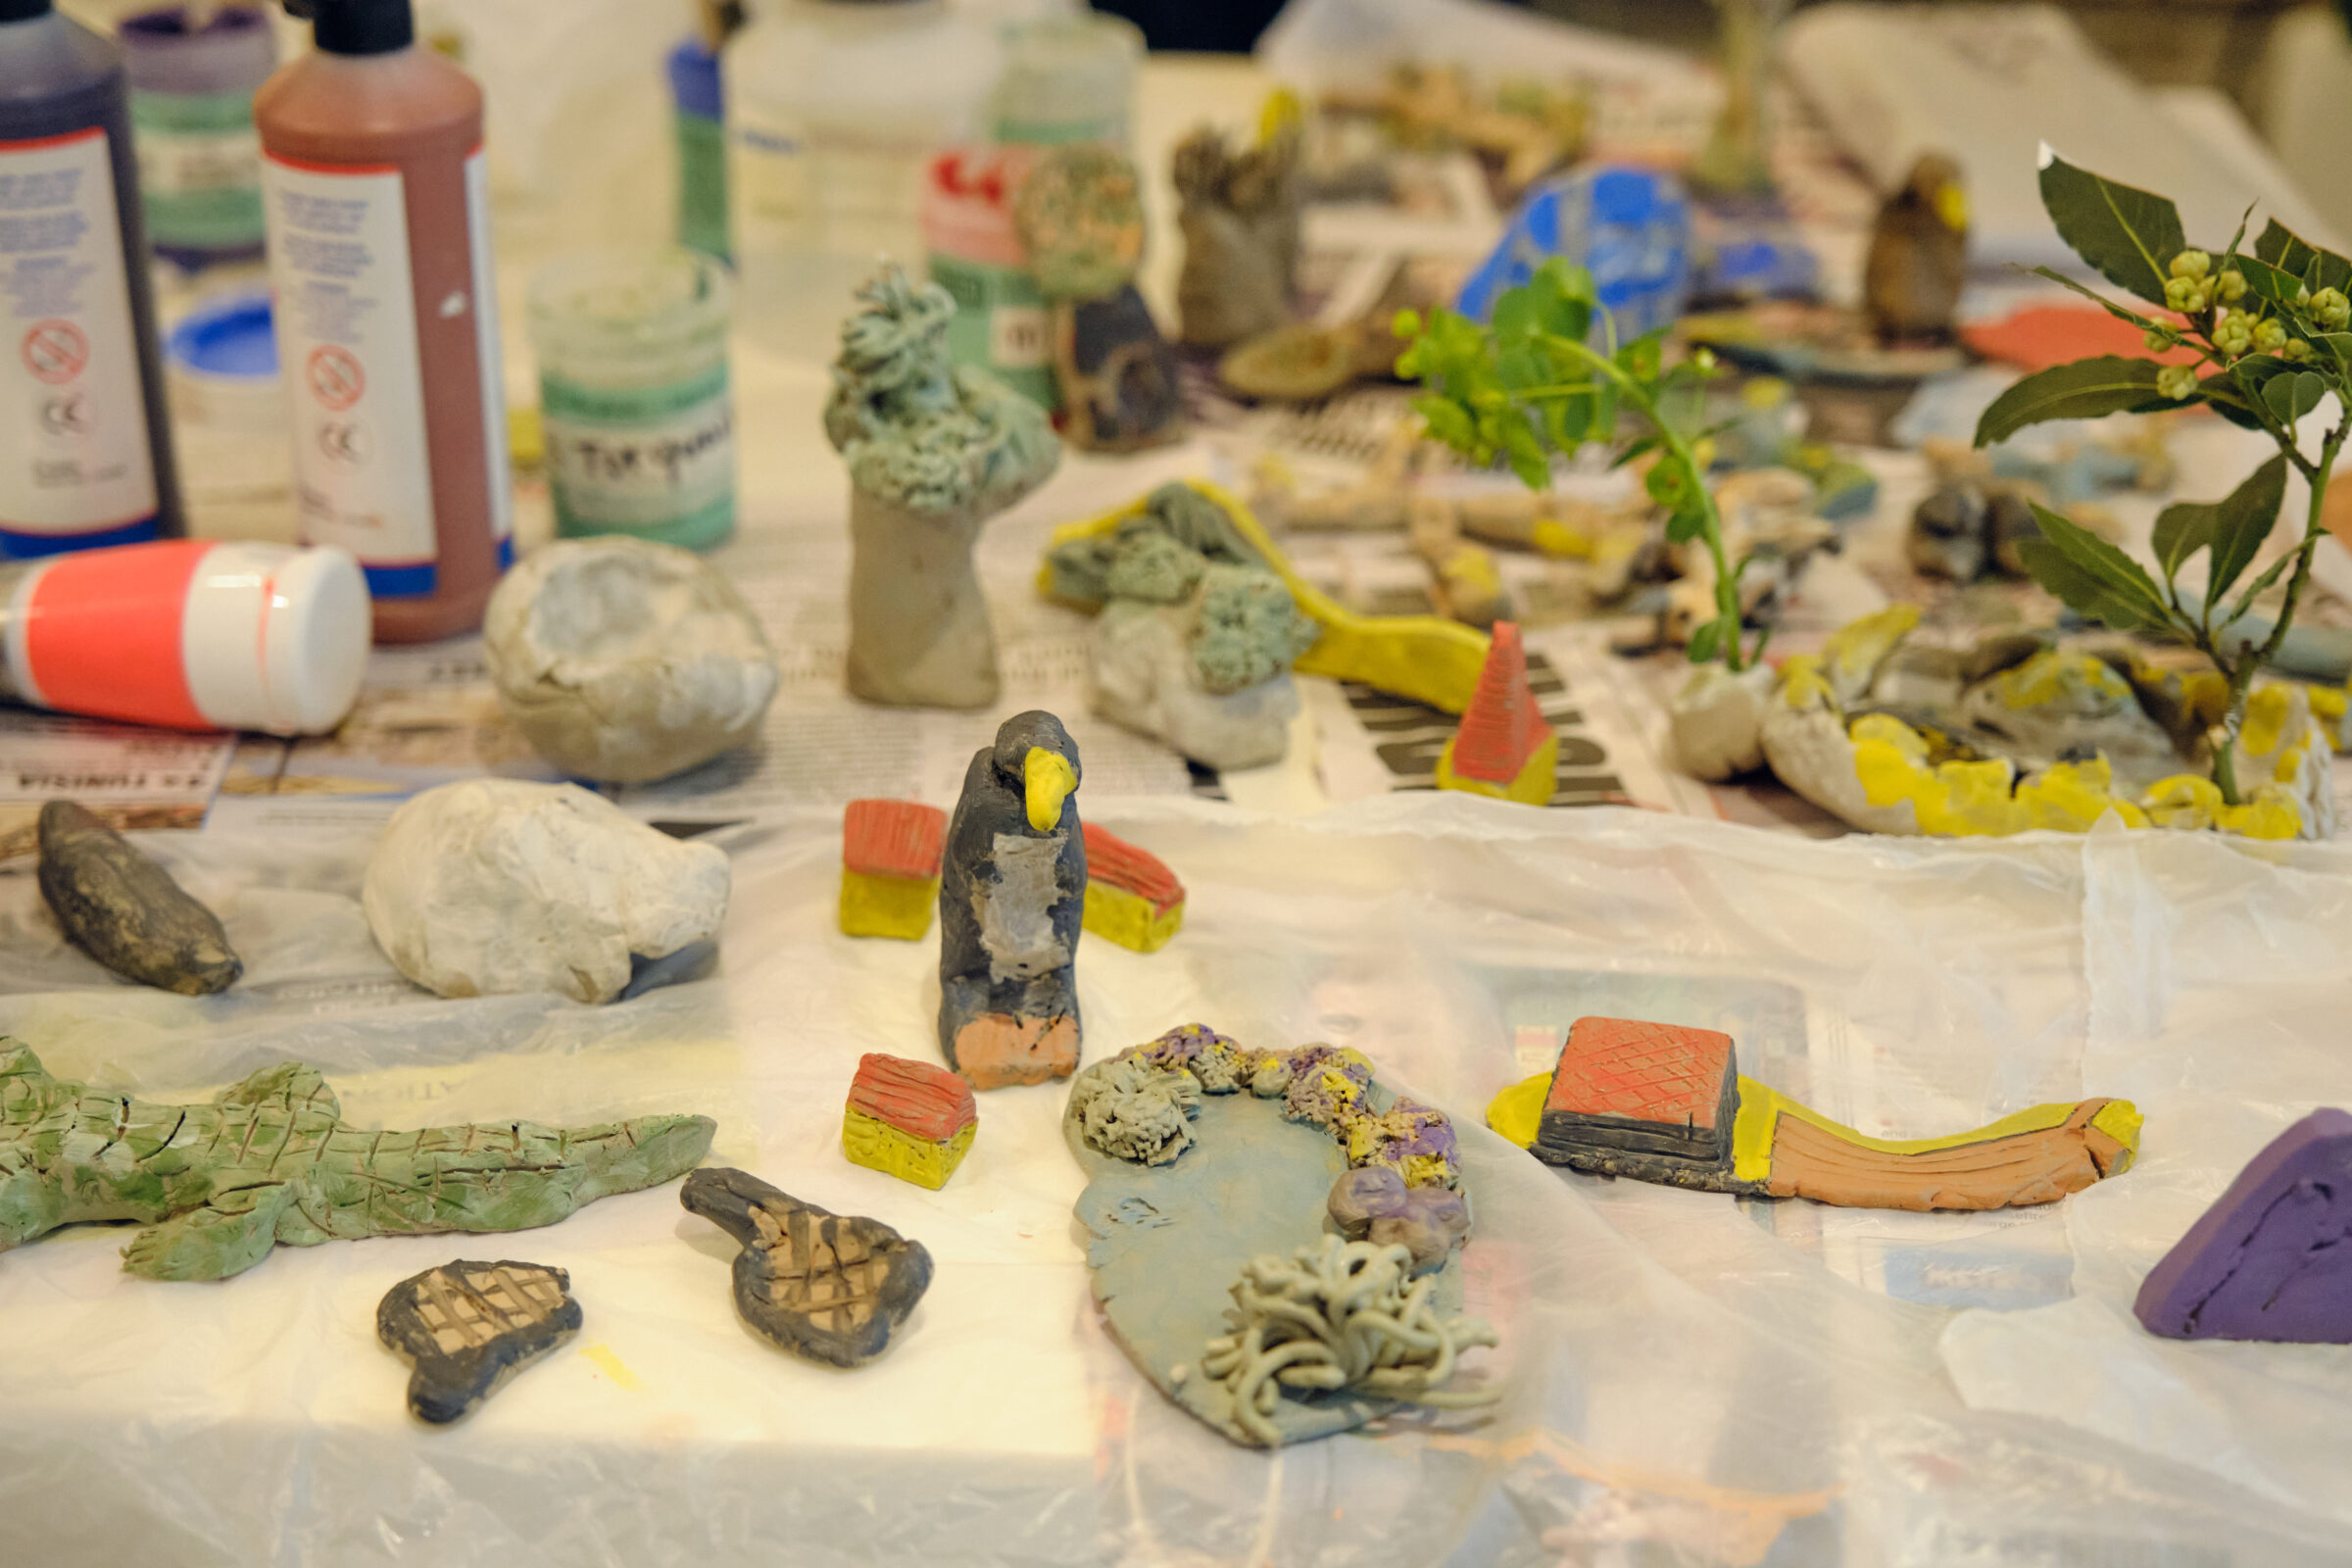 Lots of colourful clay pieces - including a penguin, a crocodile and plants, are on a table, alongside pots of glazes